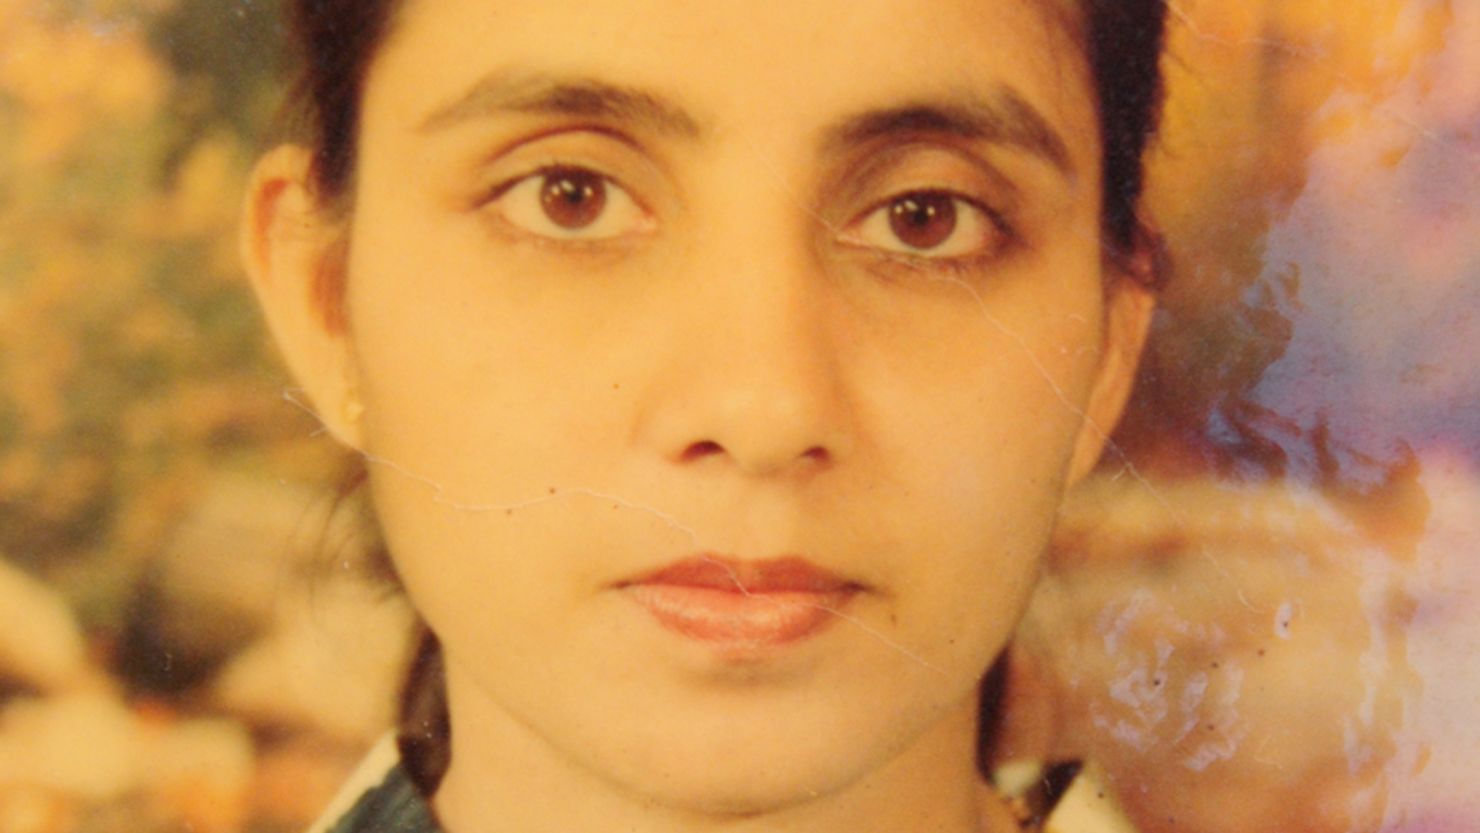 An undated family photograph of Jacintha Saldanha, the nurse who died after being hoaxed by an Australian radio show.